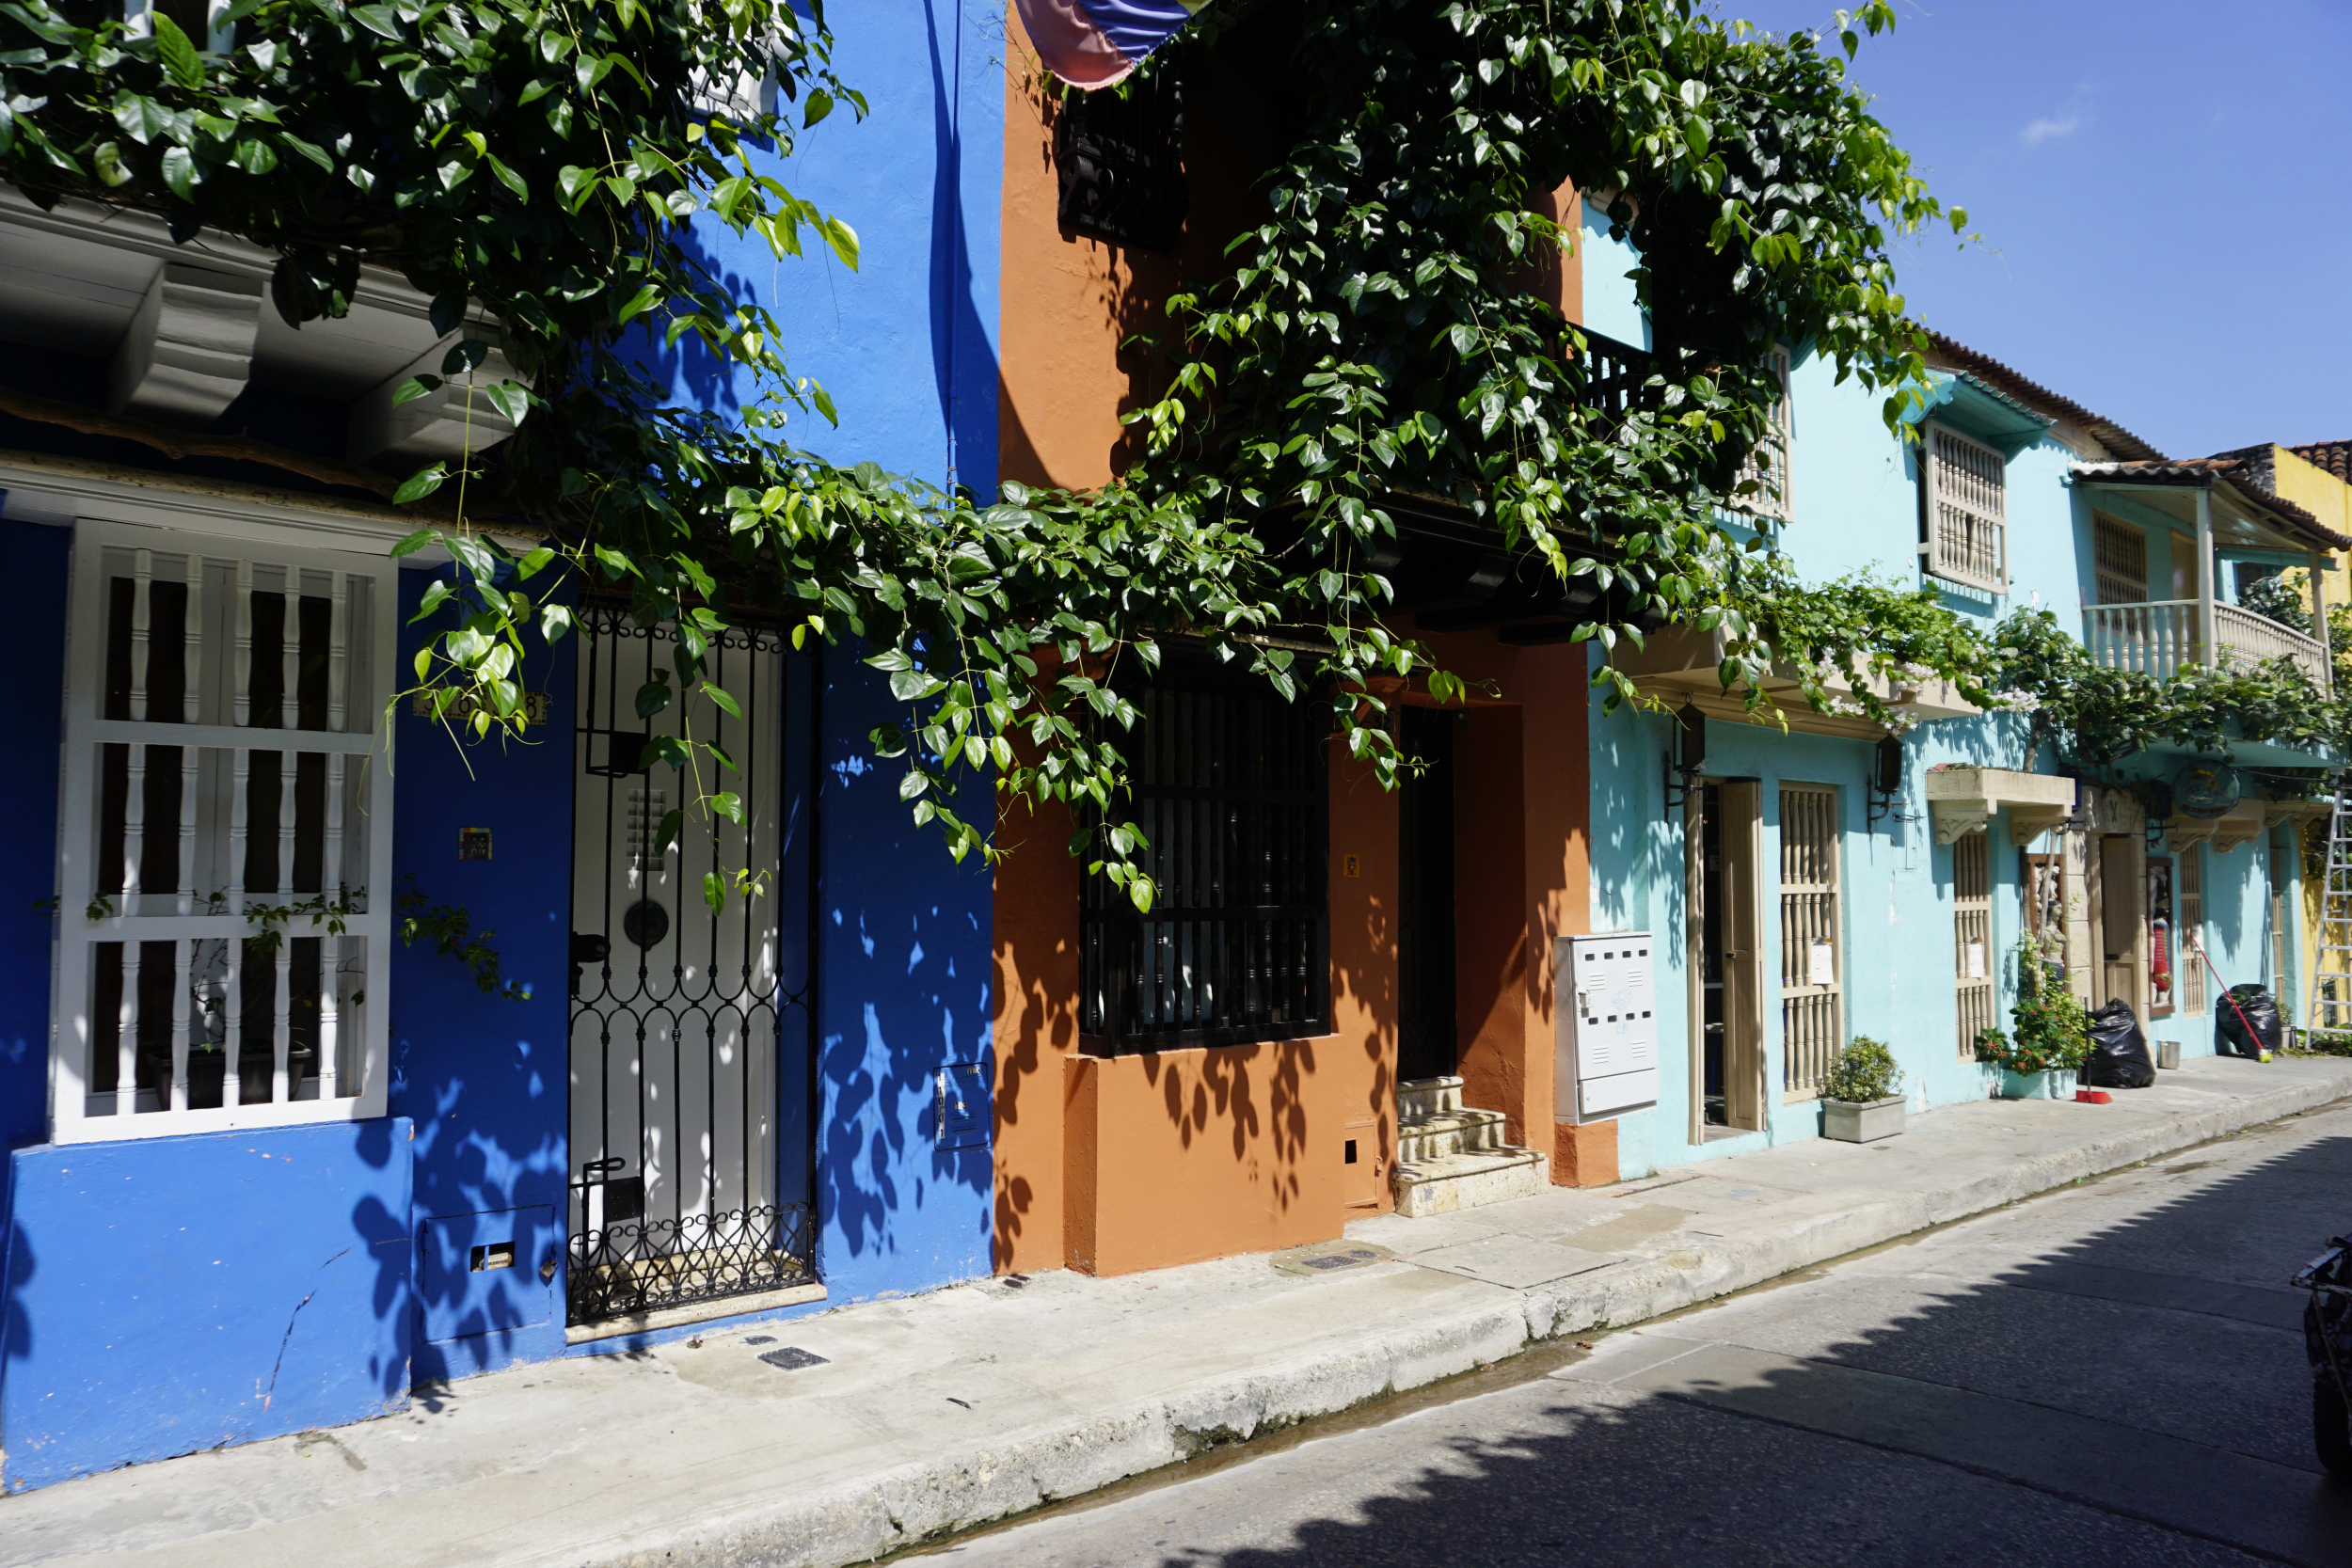 5. the colors in Cartagena